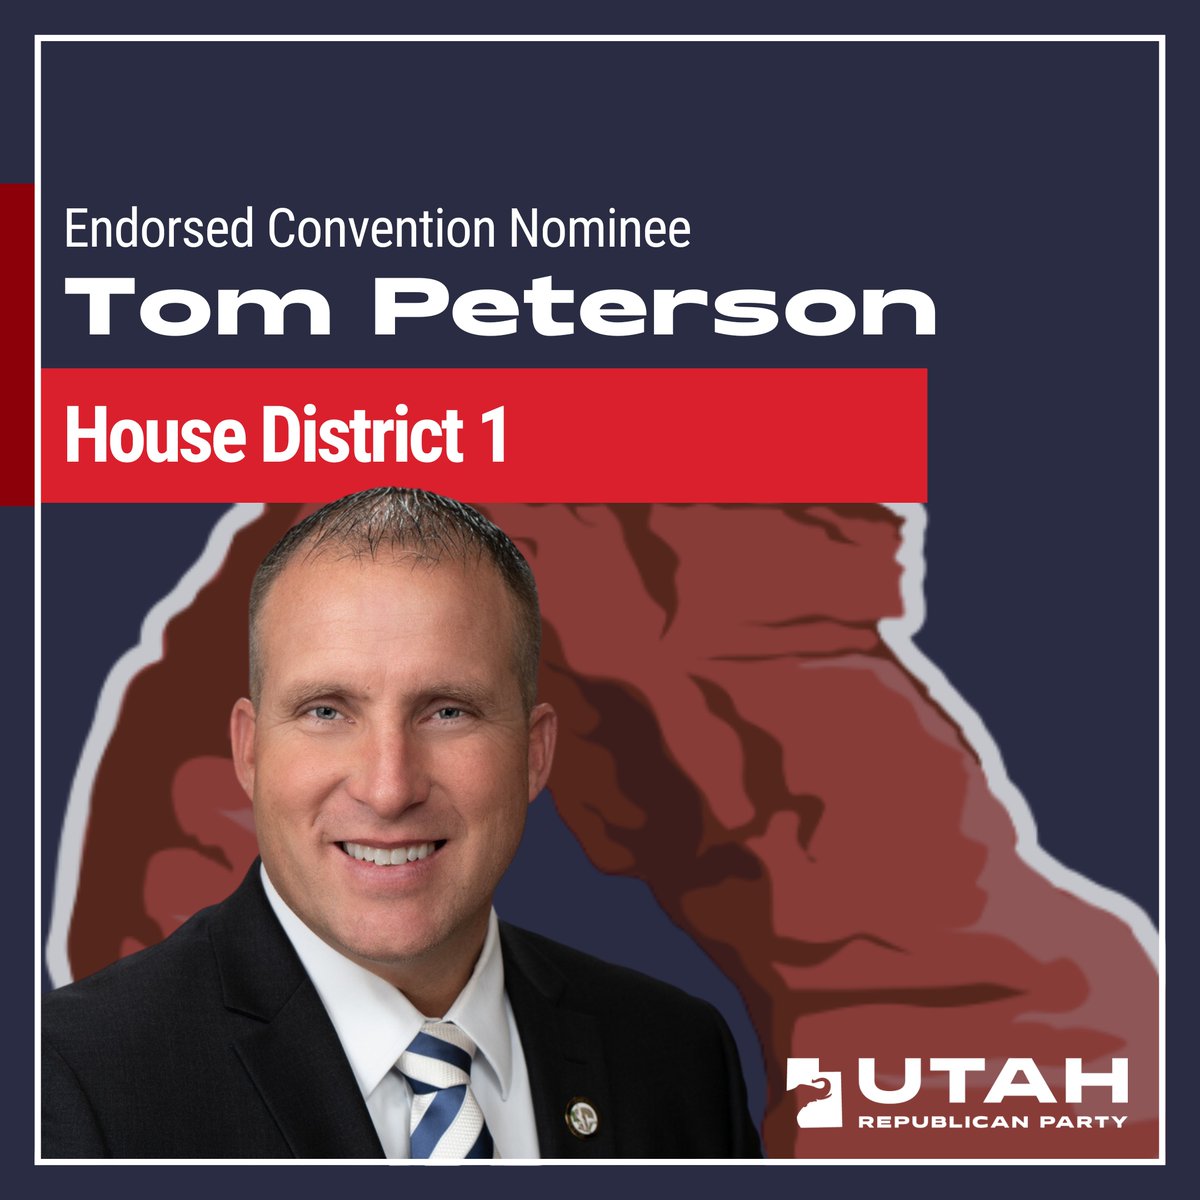 Tom Peterson is the UT GOP's Endorsed Convention Nominee for House District 1! Congratulations Tom!